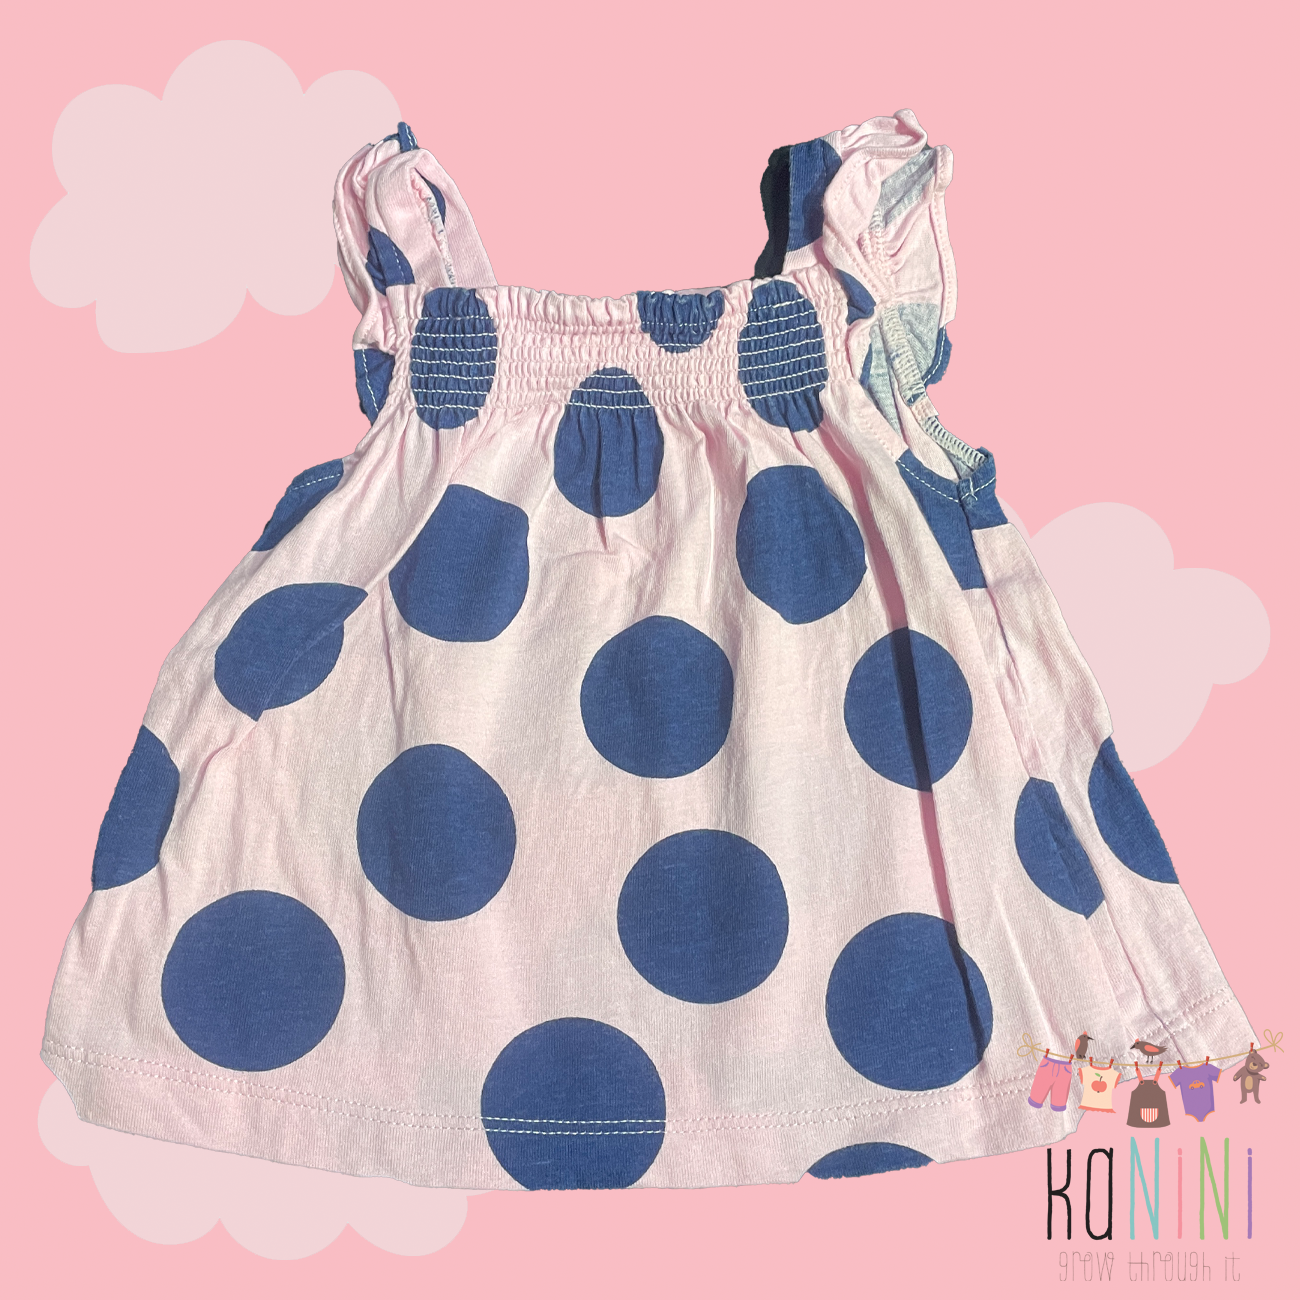 Featured image for “Carter's 9 Months Girls Polkadot Top”